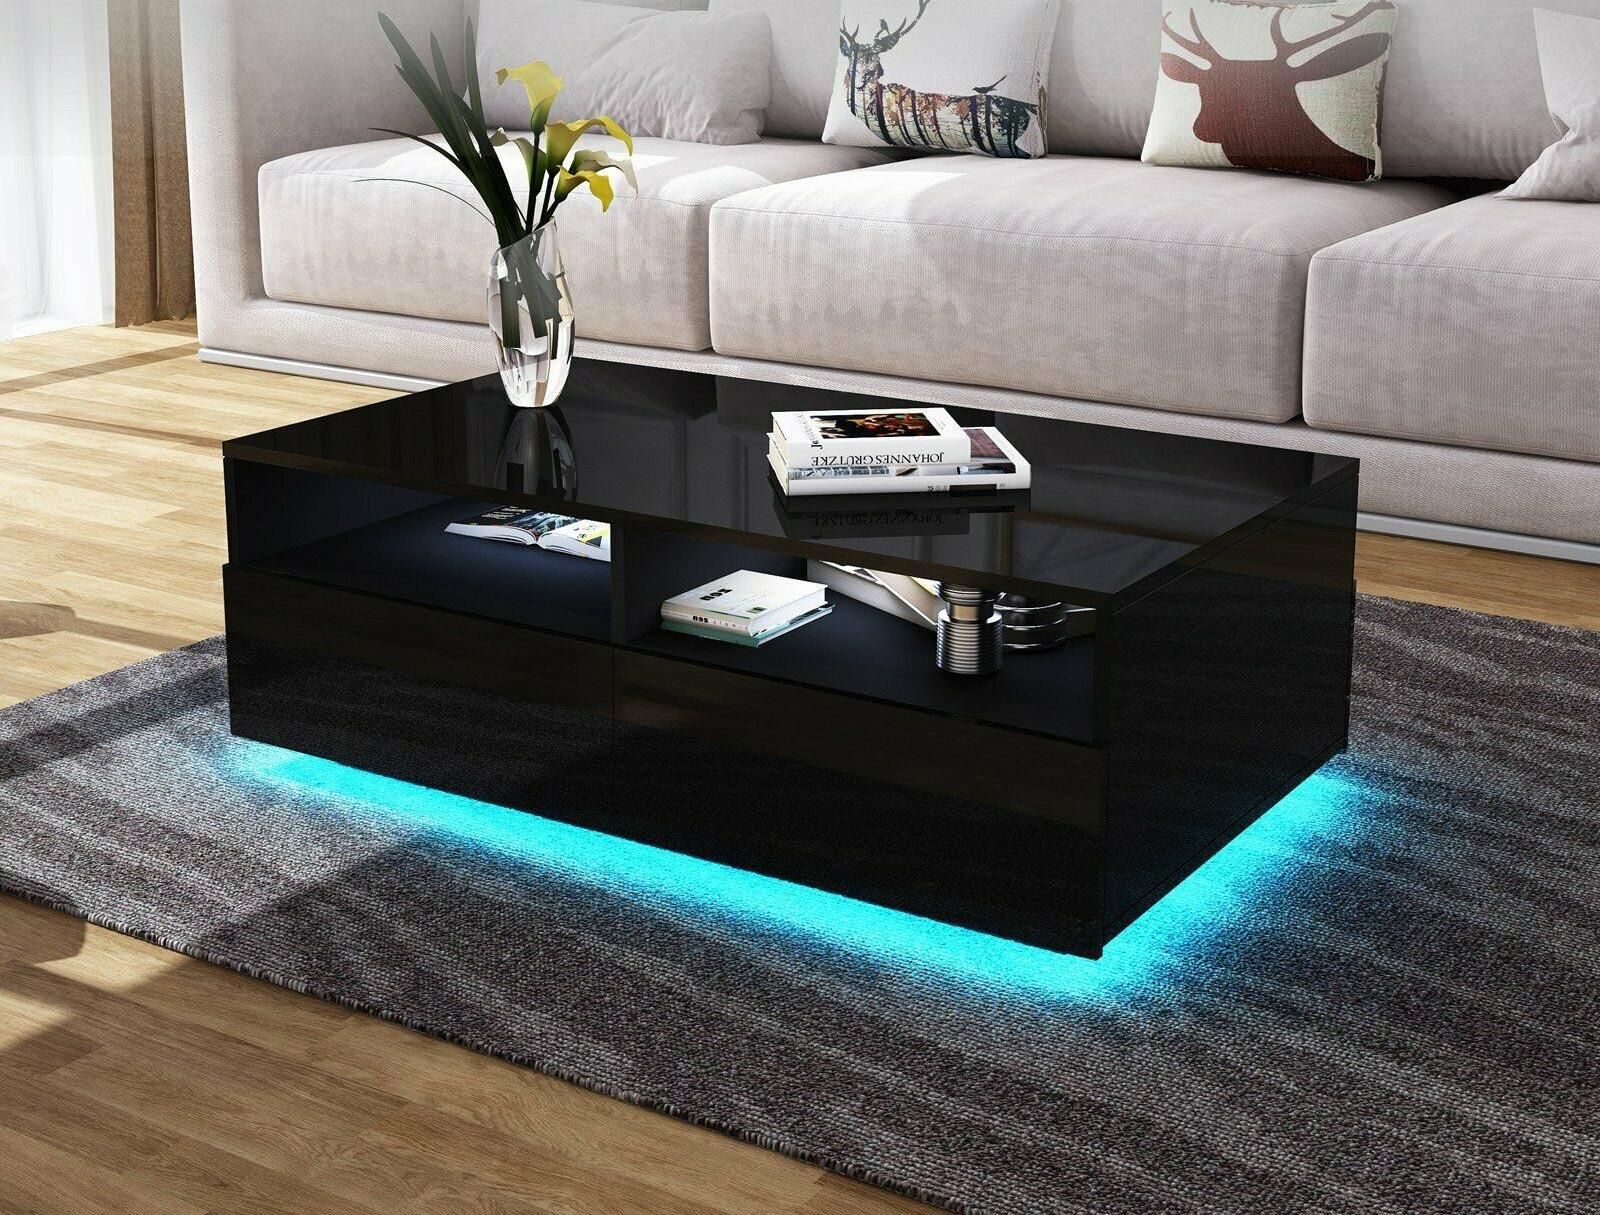 Living Room Rectangle Coffee Table 4 Drawers Rgb 16 Color Led Lights | Ebay In Coffee Tables With Drawers And Led Lights (Photo 7 of 15)